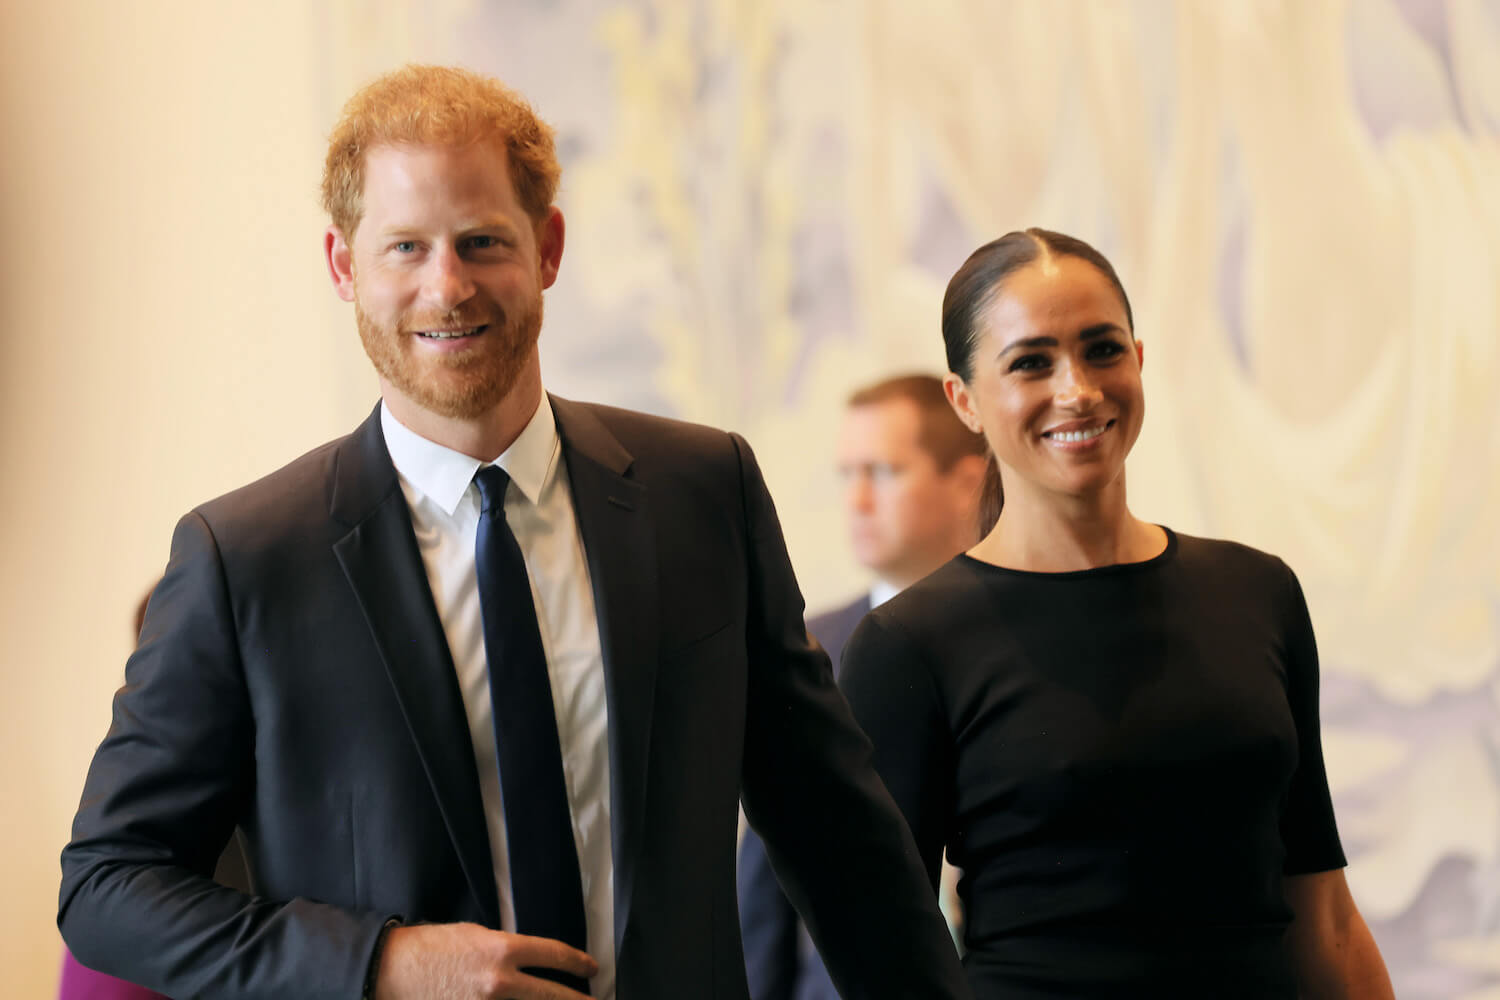 Prince Harry wears a suit and tie and smiles walking with Meghan Markle dressed in black